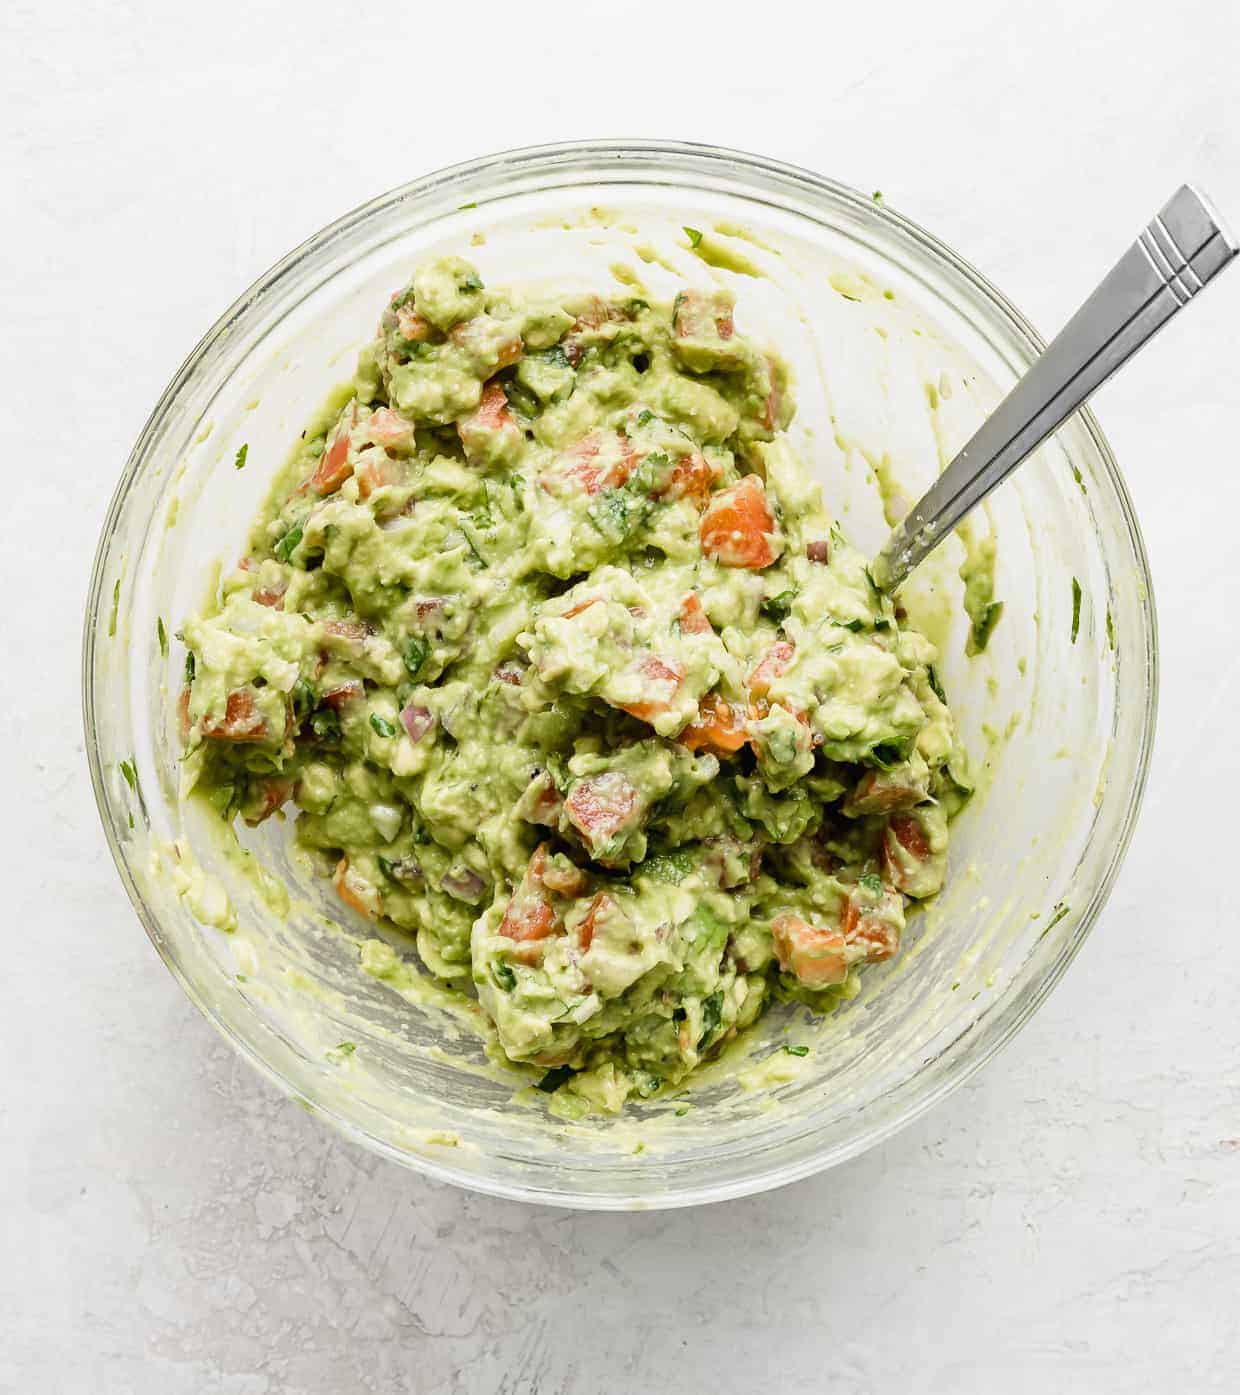 A glass bowl full of the Best Guacamole Recipe against a white background.